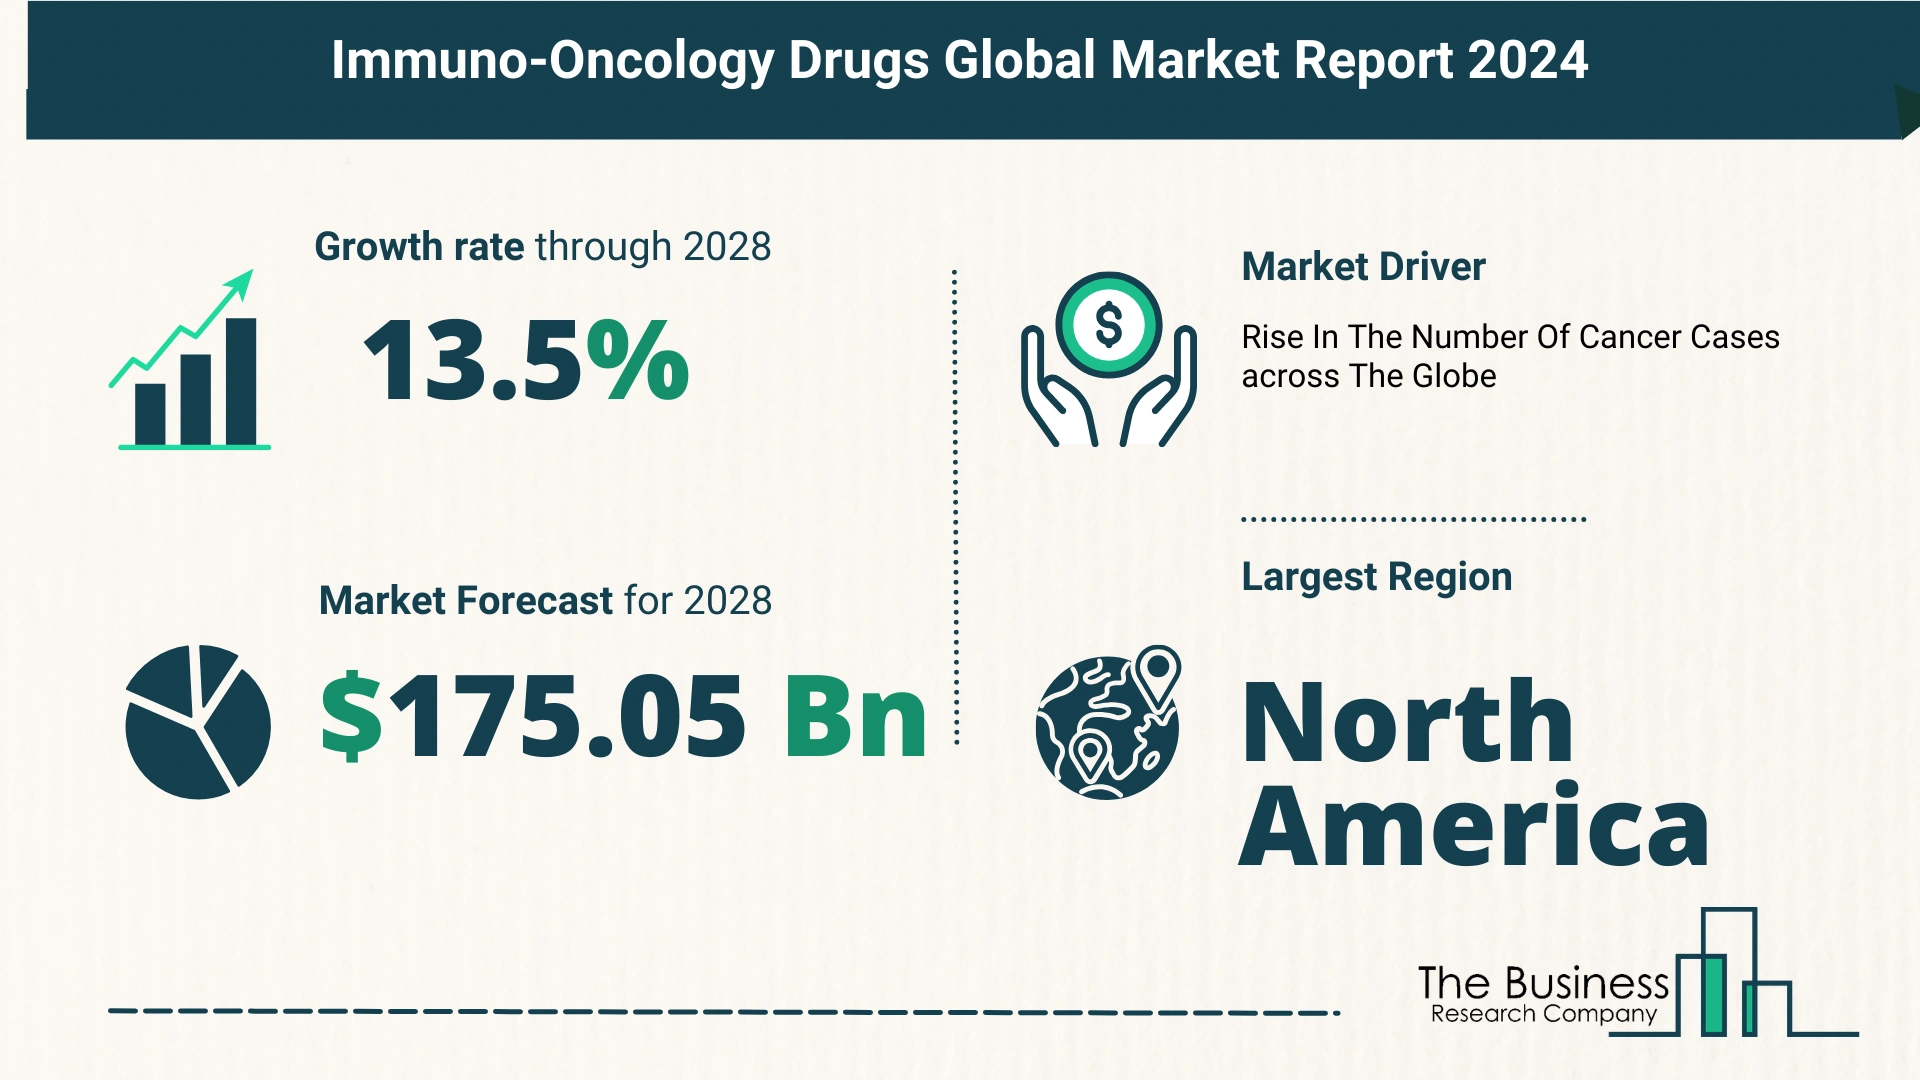 What Is The Forecast Growth Rate For The Immuno-Oncology Drugs Market?